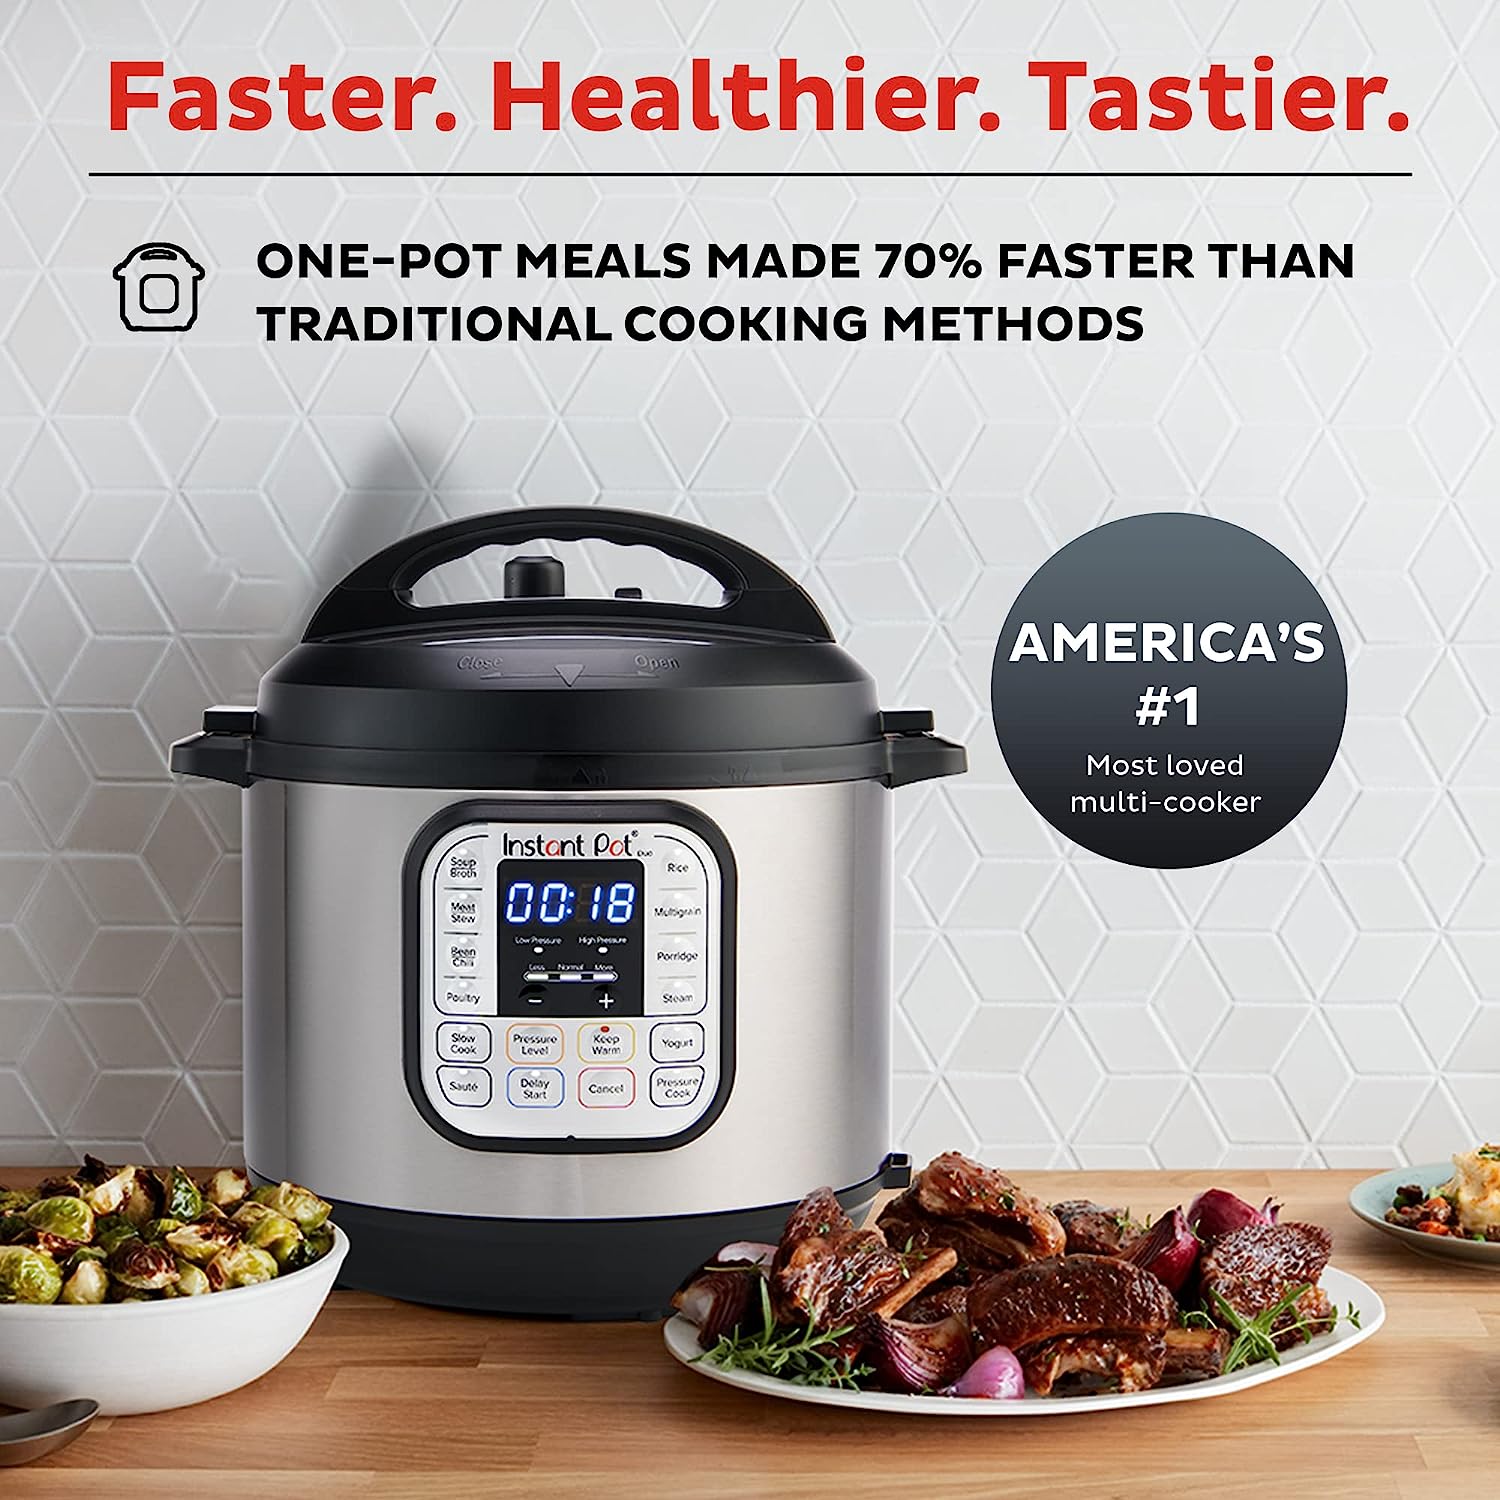 https://bigbigmart.com/wp-content/uploads/2023/07/Instant-Pot-Duo-7-in-1-Electric-Pressure-Cooker-Slow-Cooker-Rice-Cooker-Steamer-Saute-Yogurt-Maker-Warmer-Sterilizer-Includes-Free-App-with-over-1900-Recipes-Stainless-Steel-3-Quart1.jpg